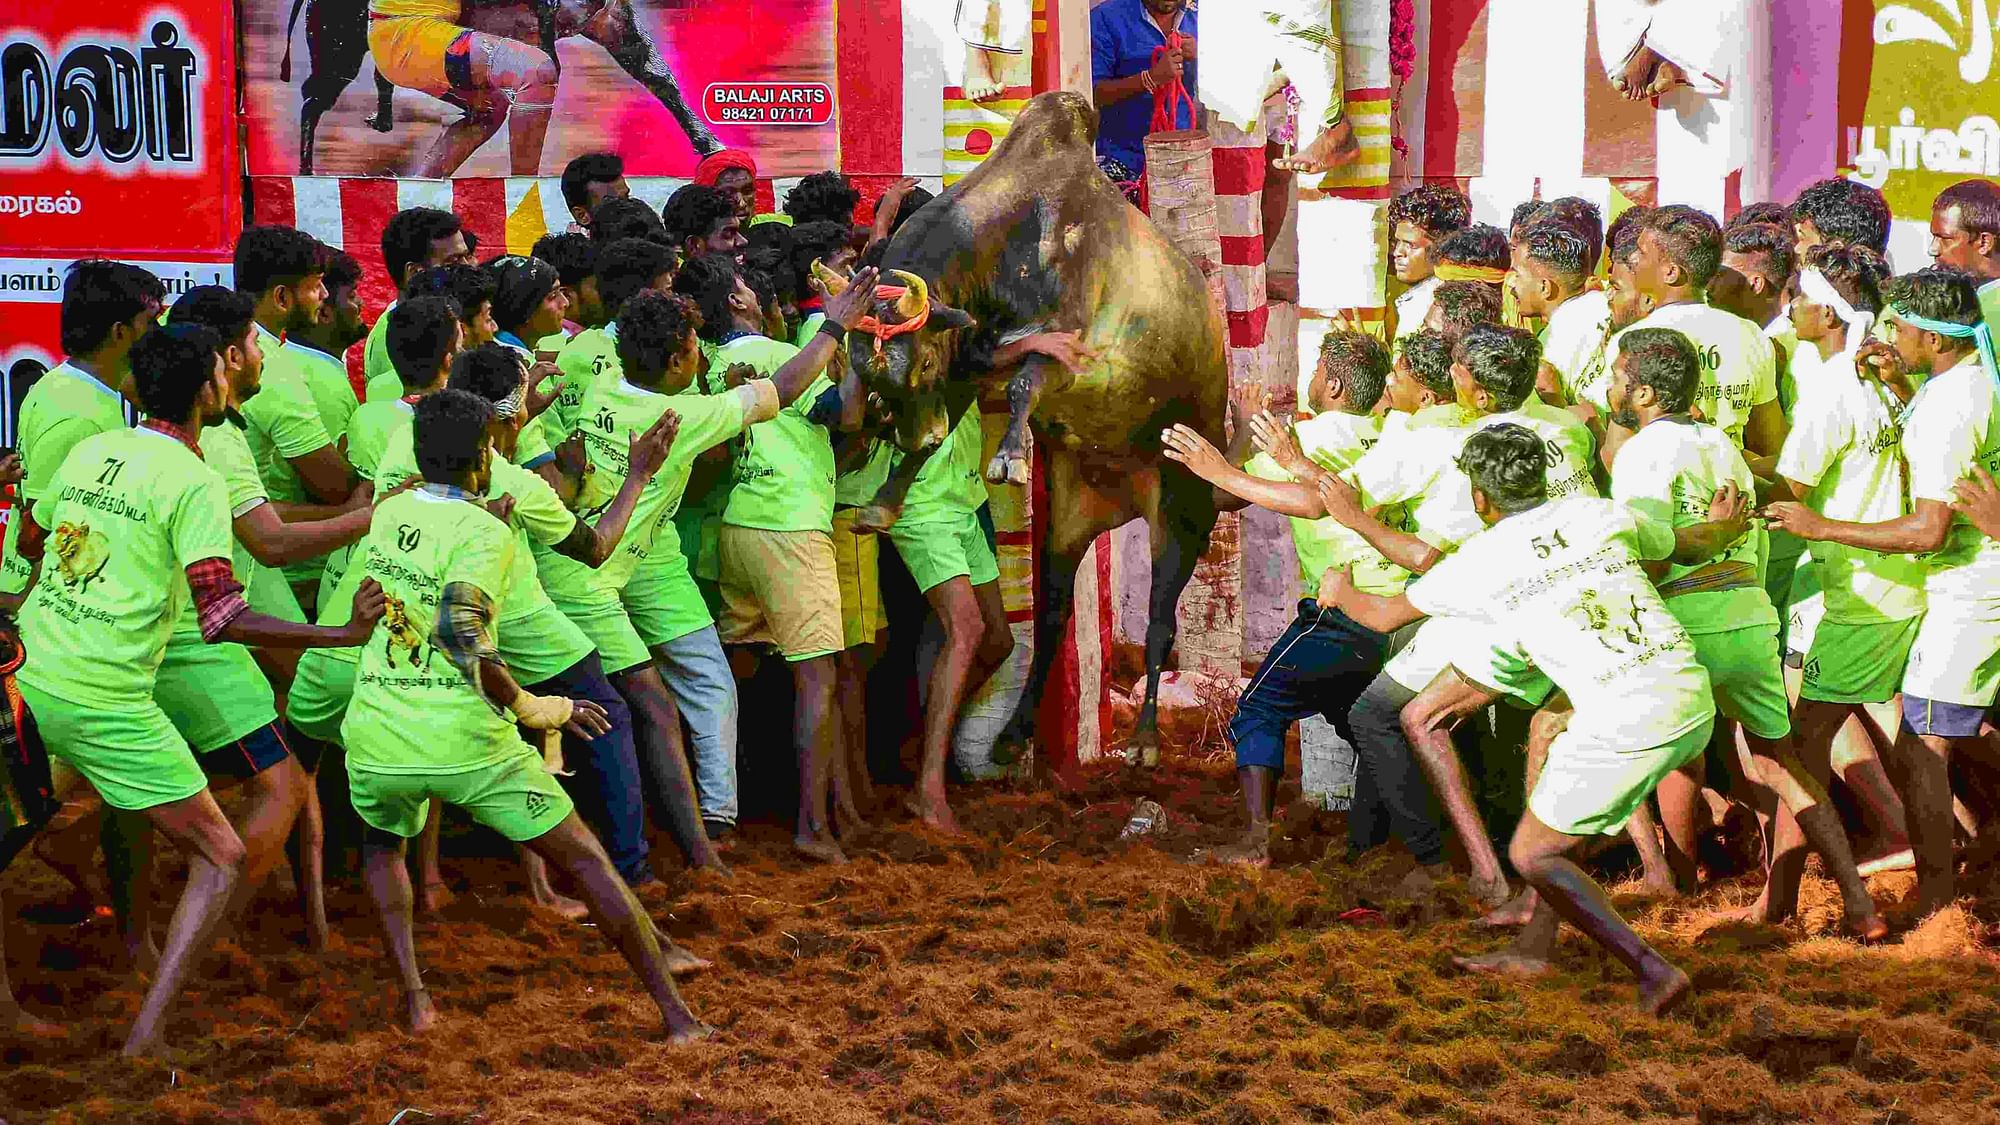 Participants attempt to tame a bull during Jallikattu in Madurai on 17 January.